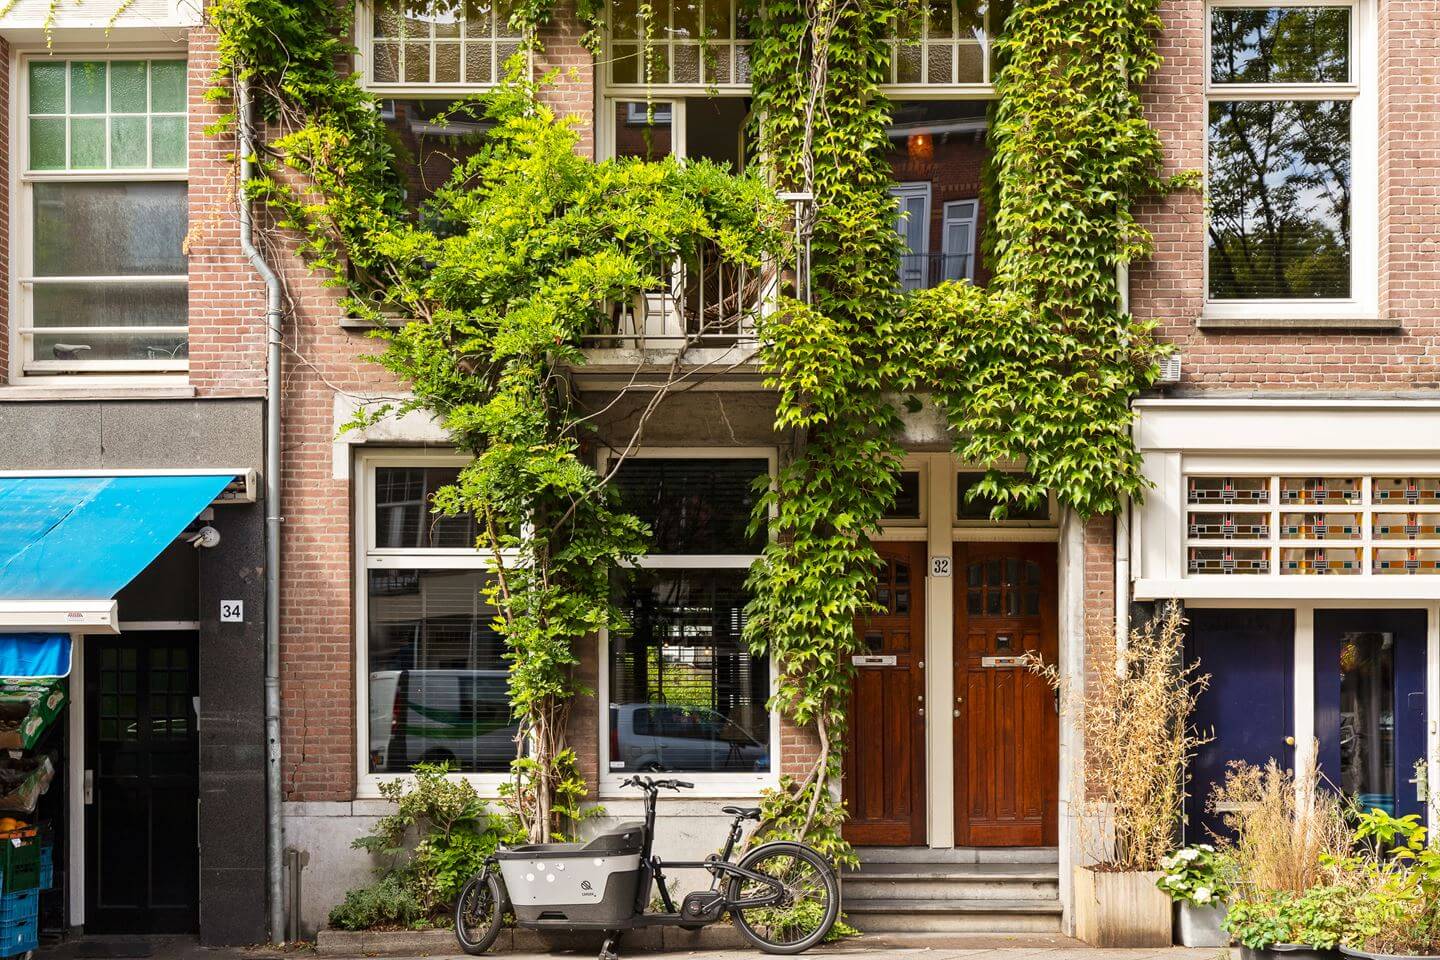 516 1440 A Stylish Family Home in a Dutch Townhouse